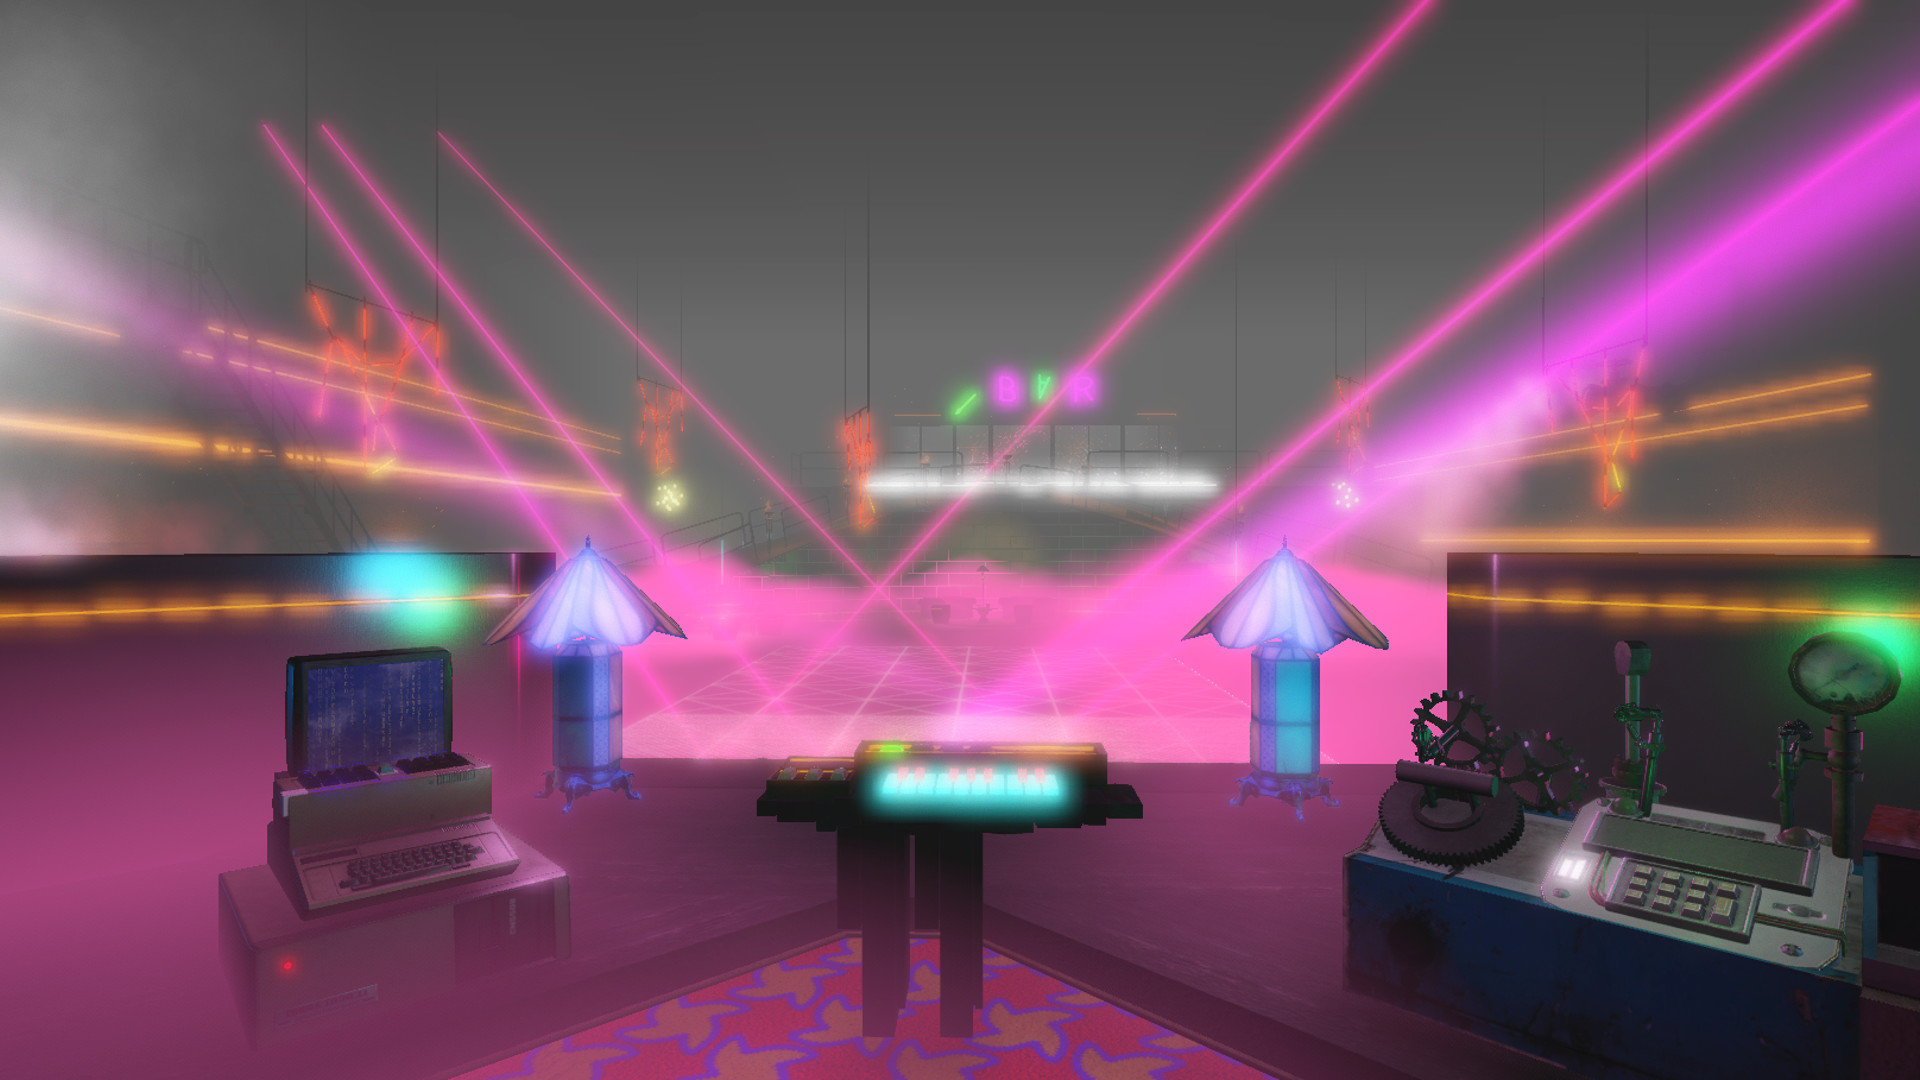 Isolationist Nightclub Simulator Is Launching On March 11th For PC Audiences